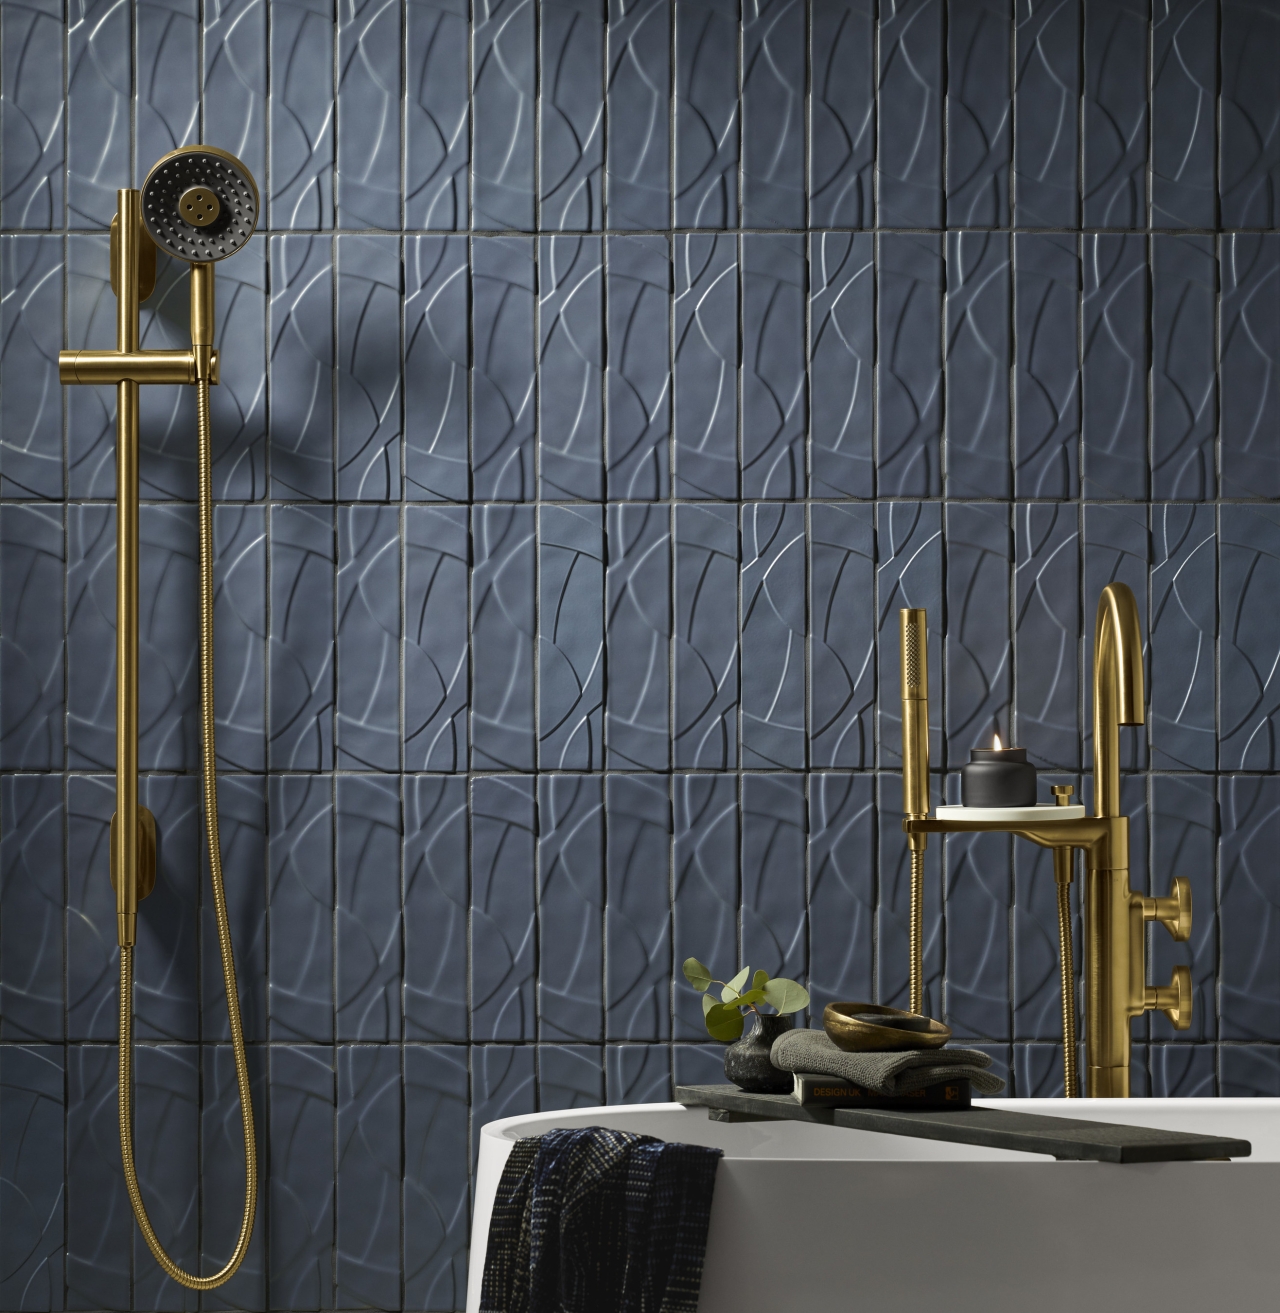 Image of a tile wall in a bathroom